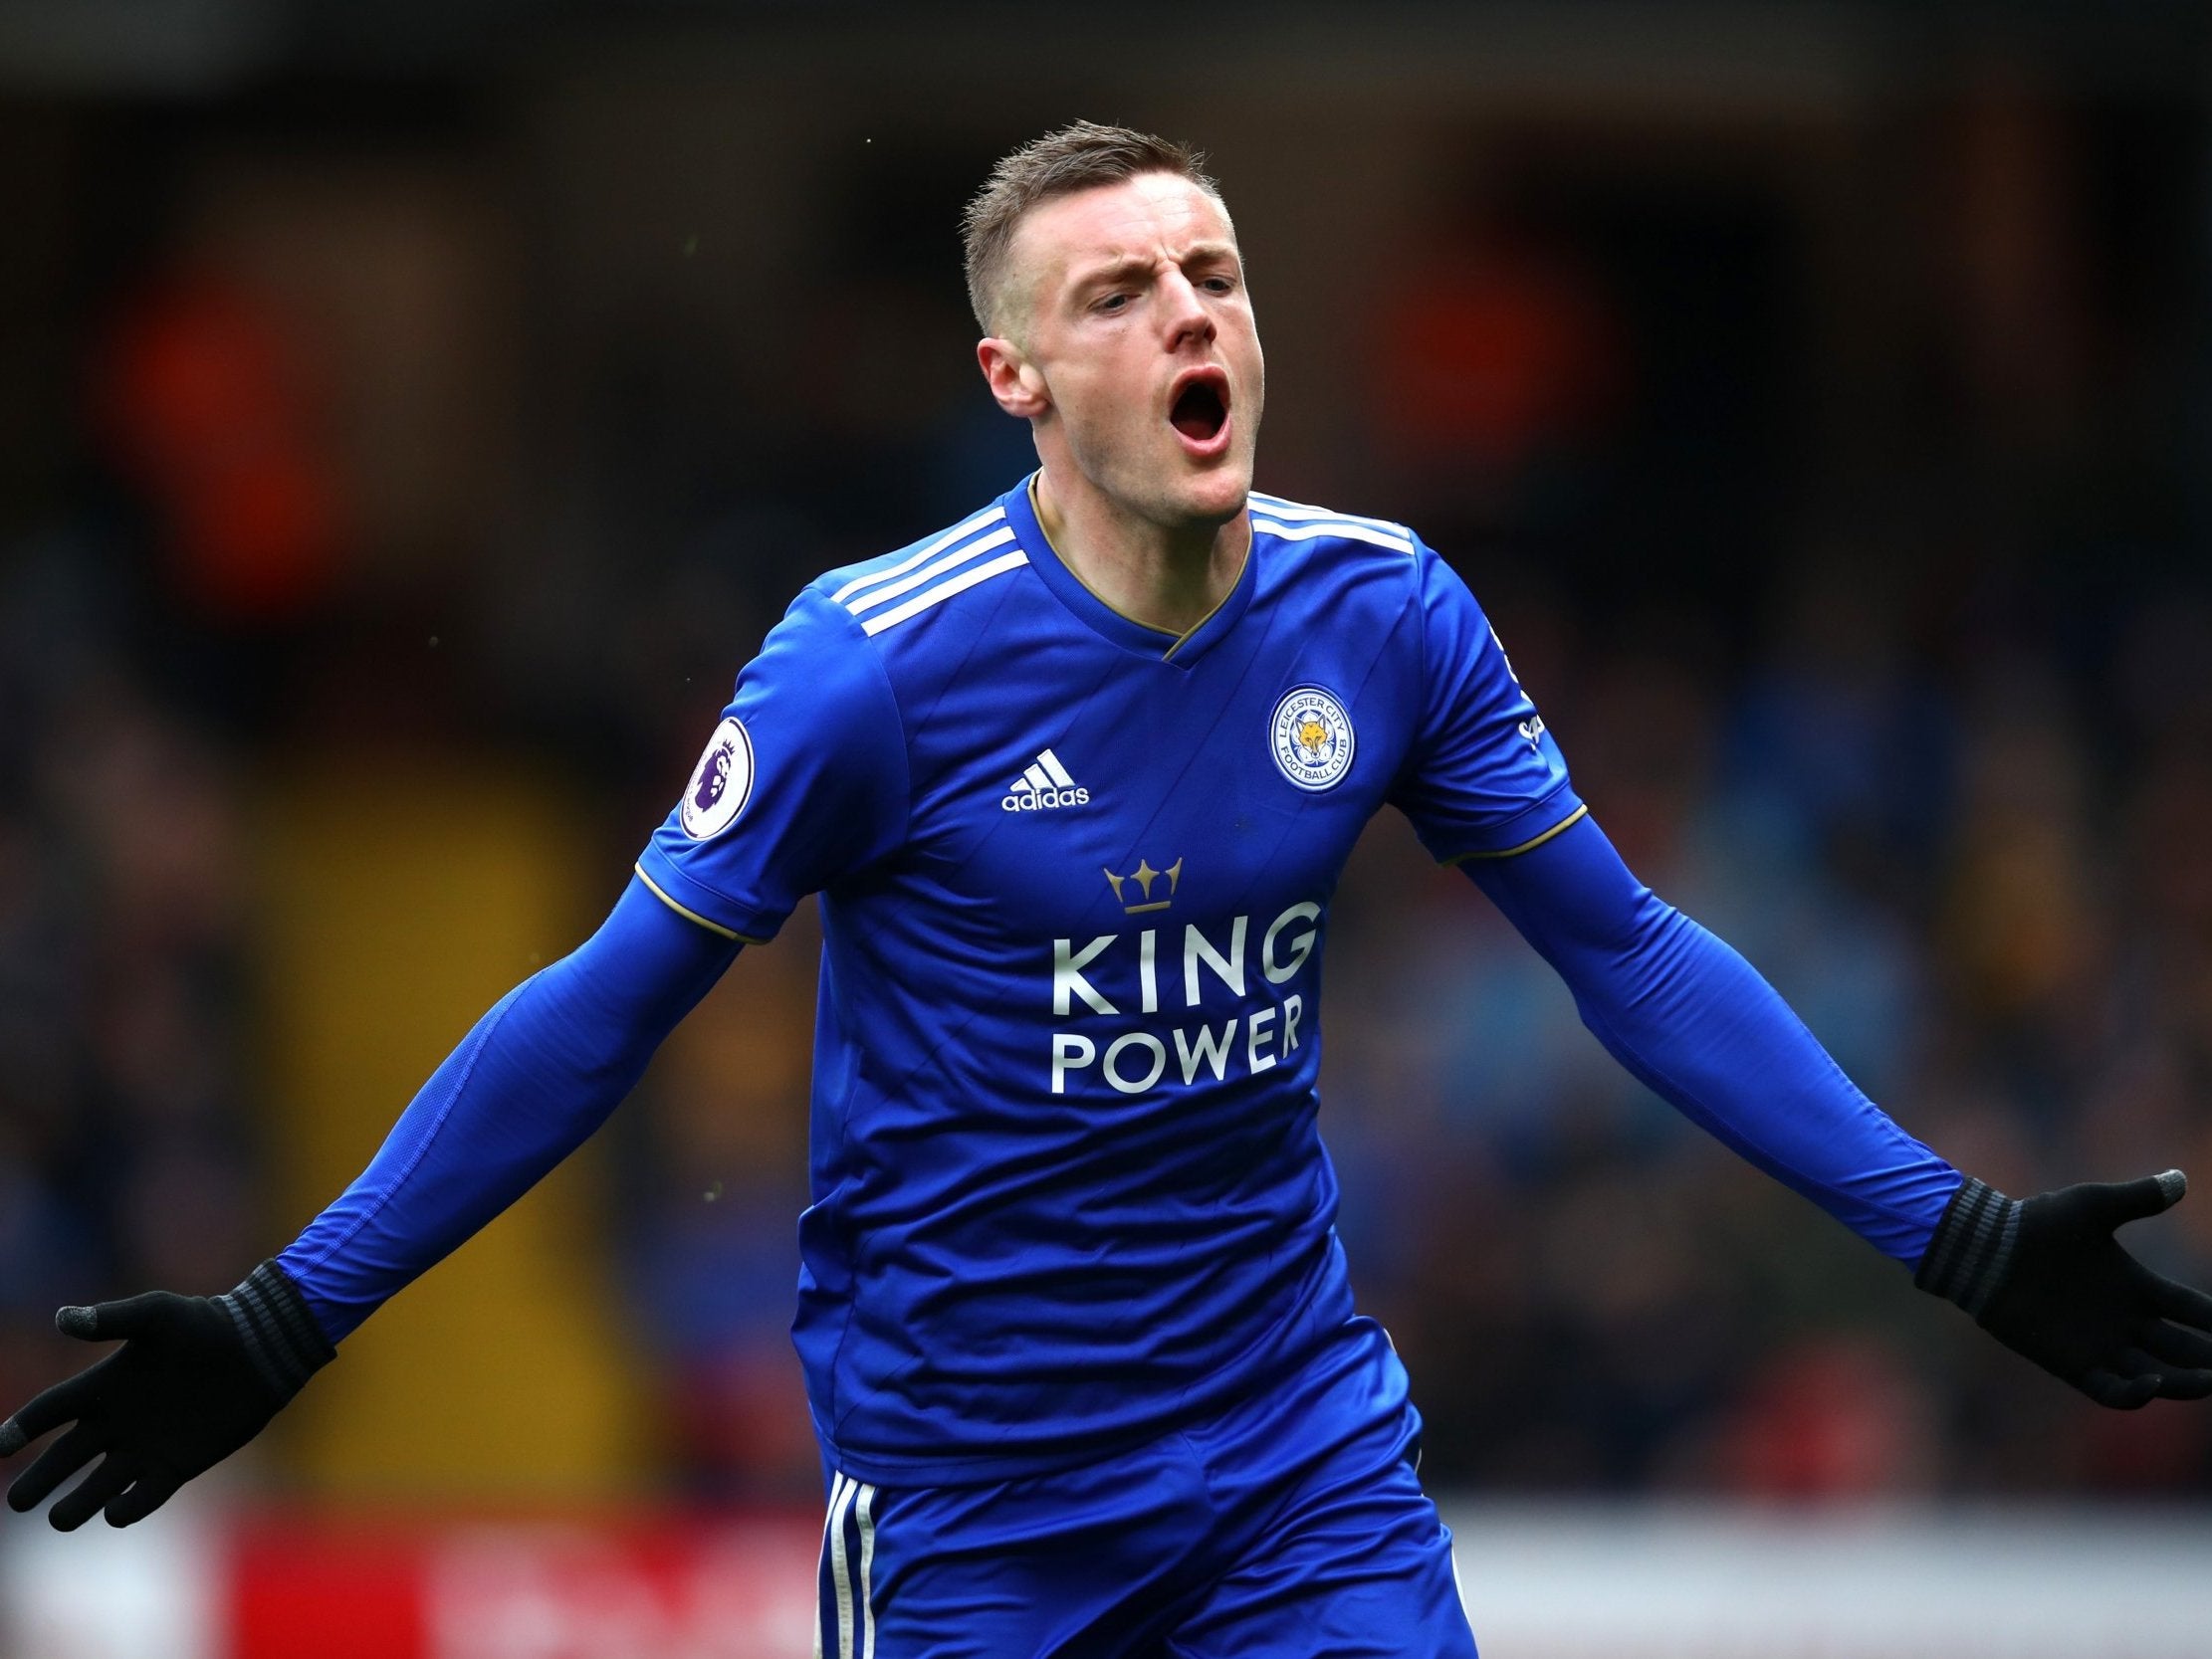 Vardy equalised for the Foxes